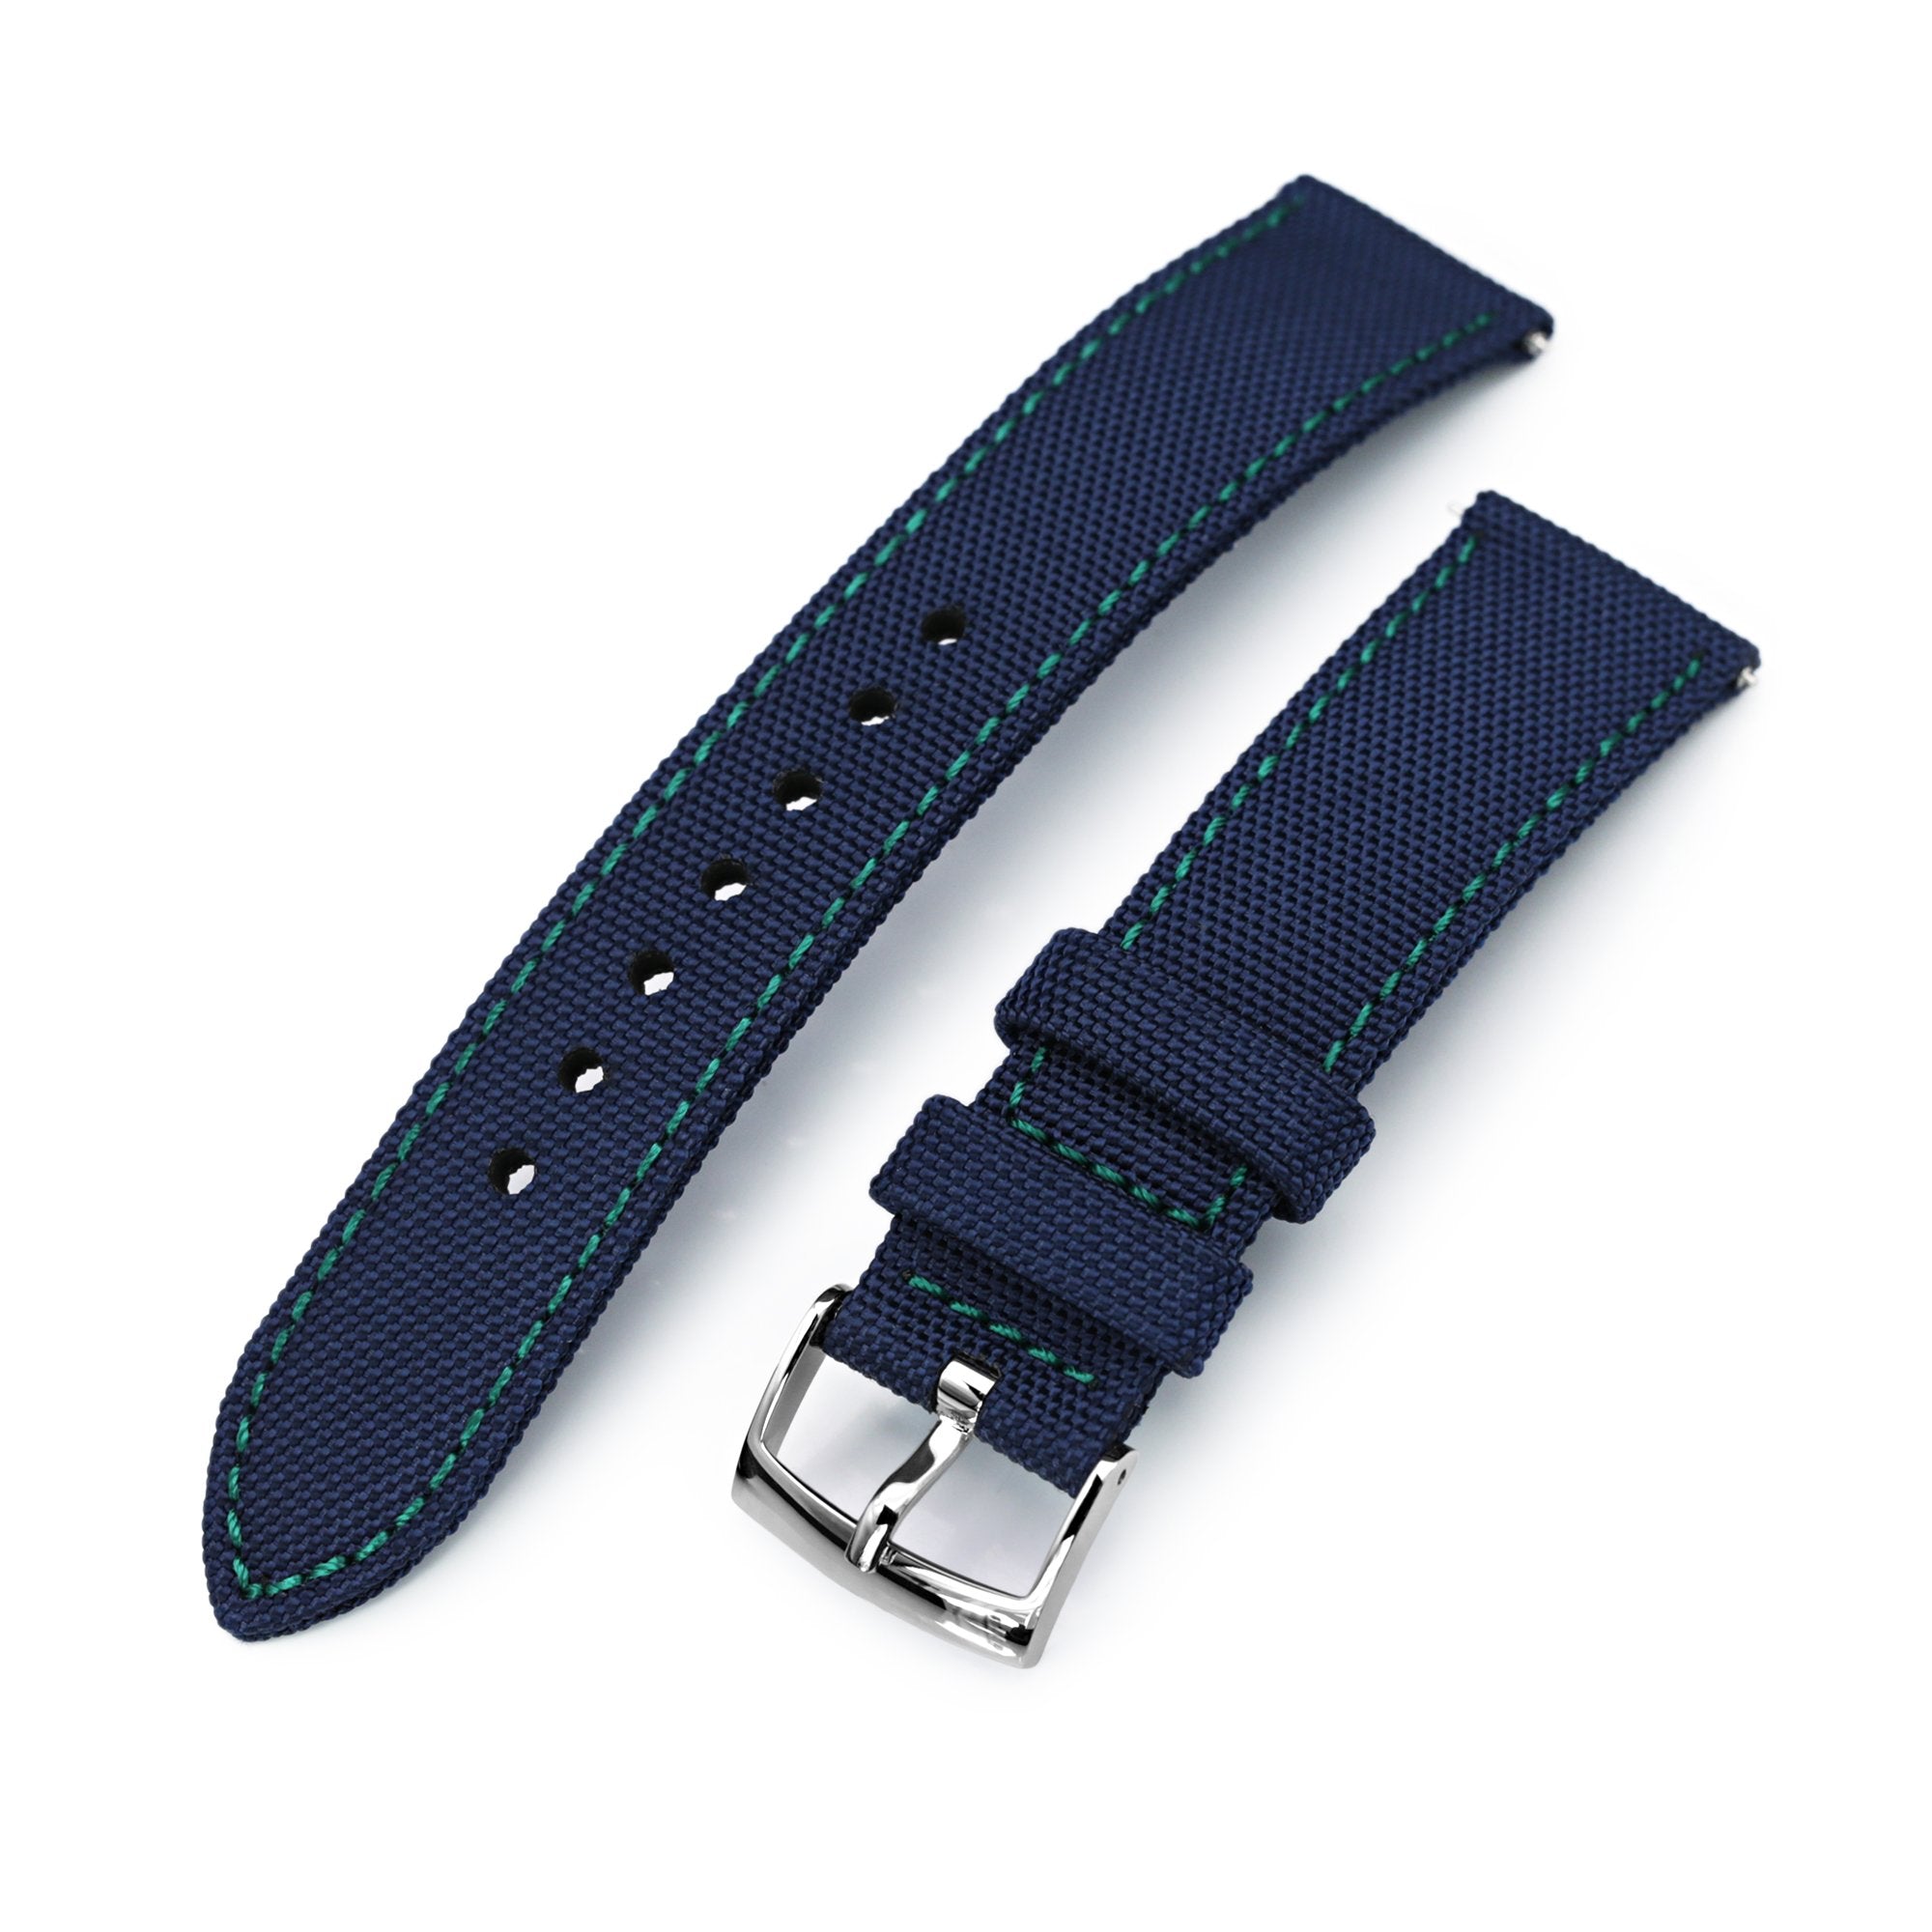 20mm Sailcloth Strap Navy Blue Quick Release Nylon Watch Band, Green Stitching Strapcode Watch Bands